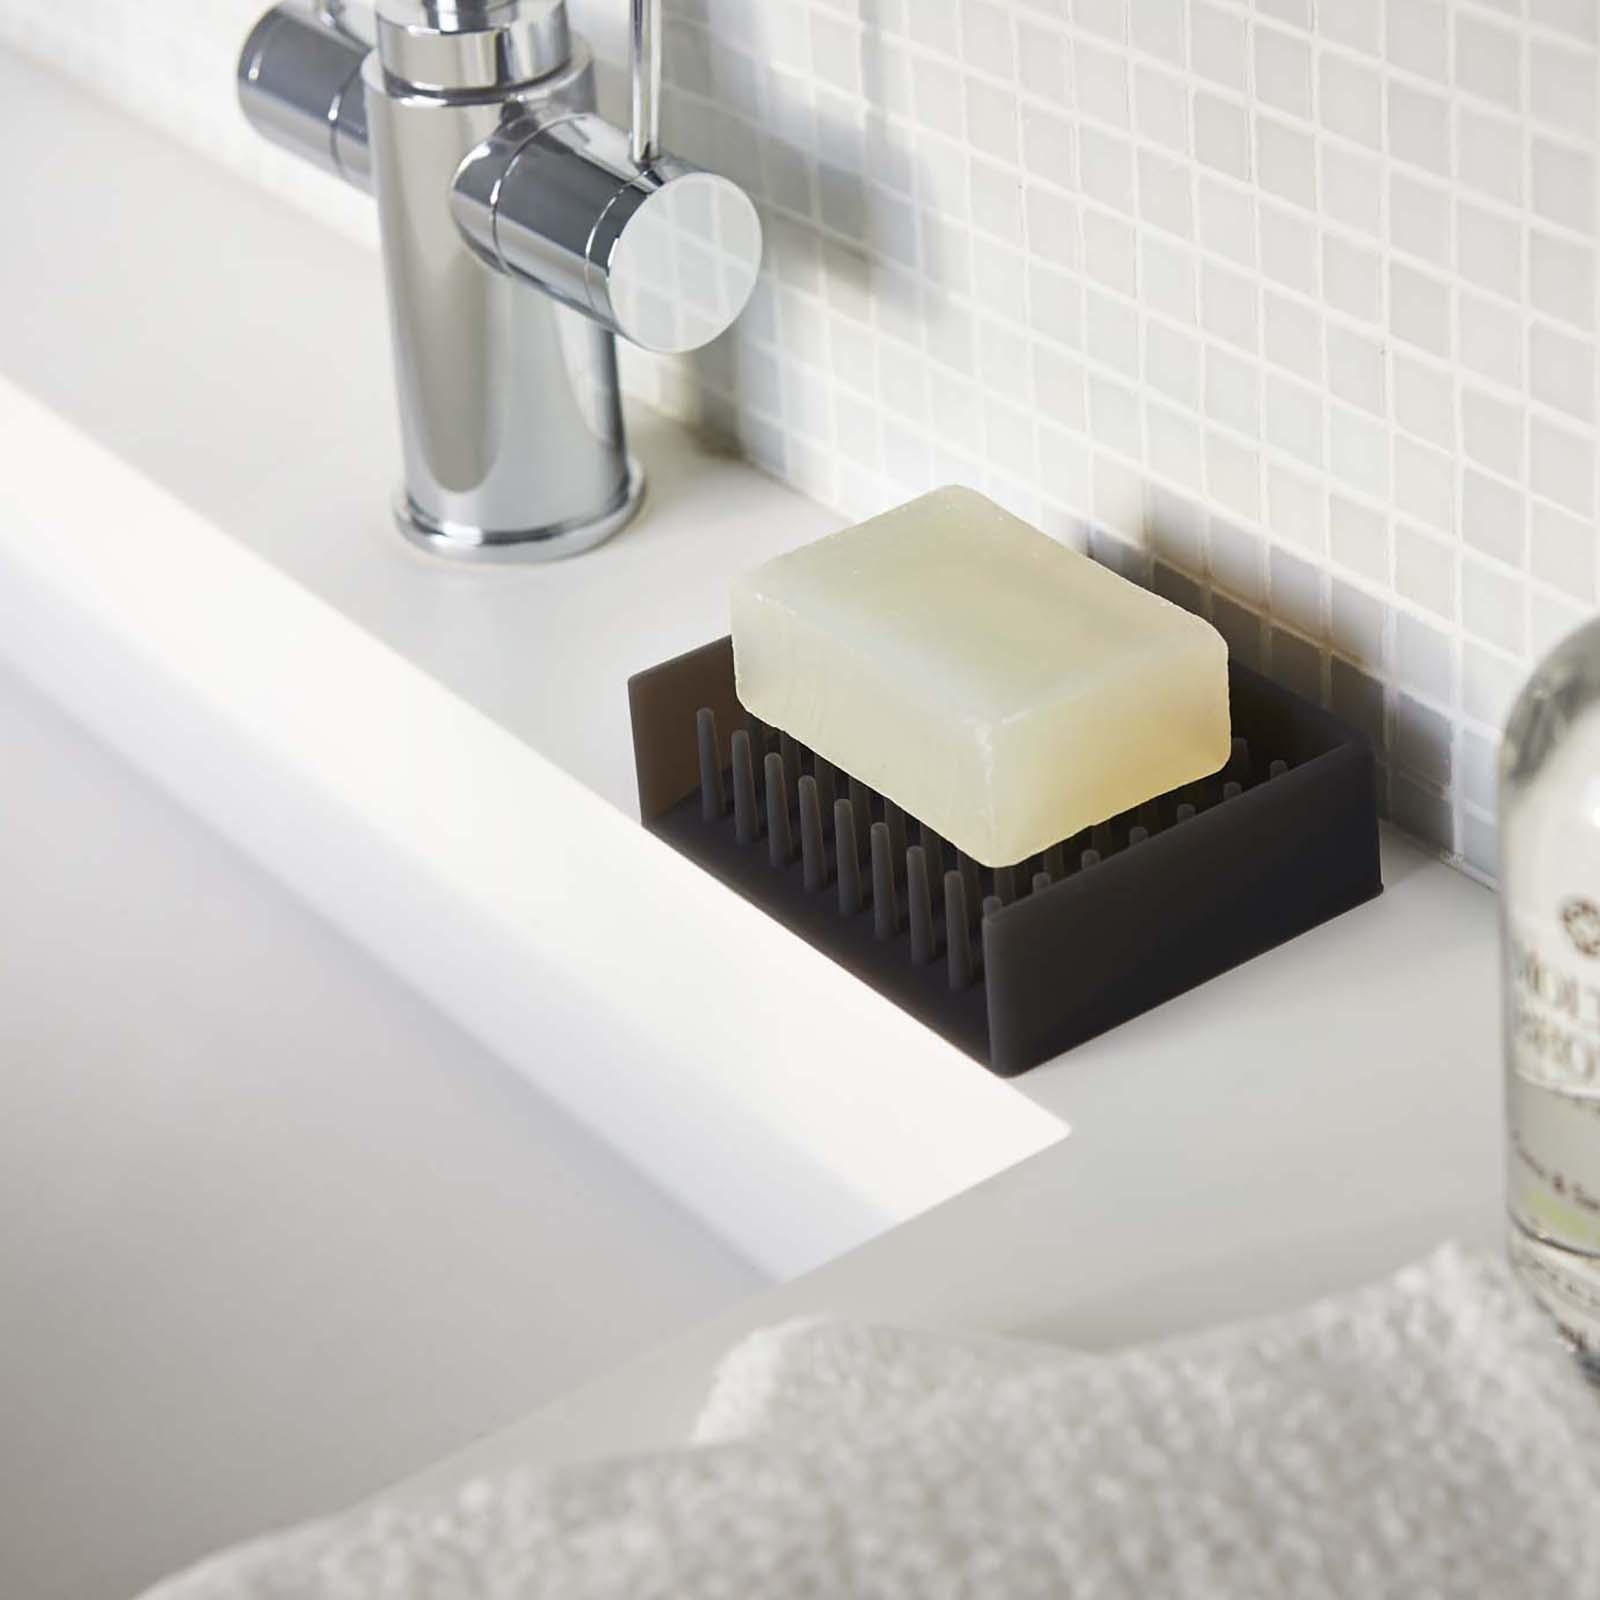 The Ingenious  Find That'll Eliminate the Bar Soap Mess at Your Sink